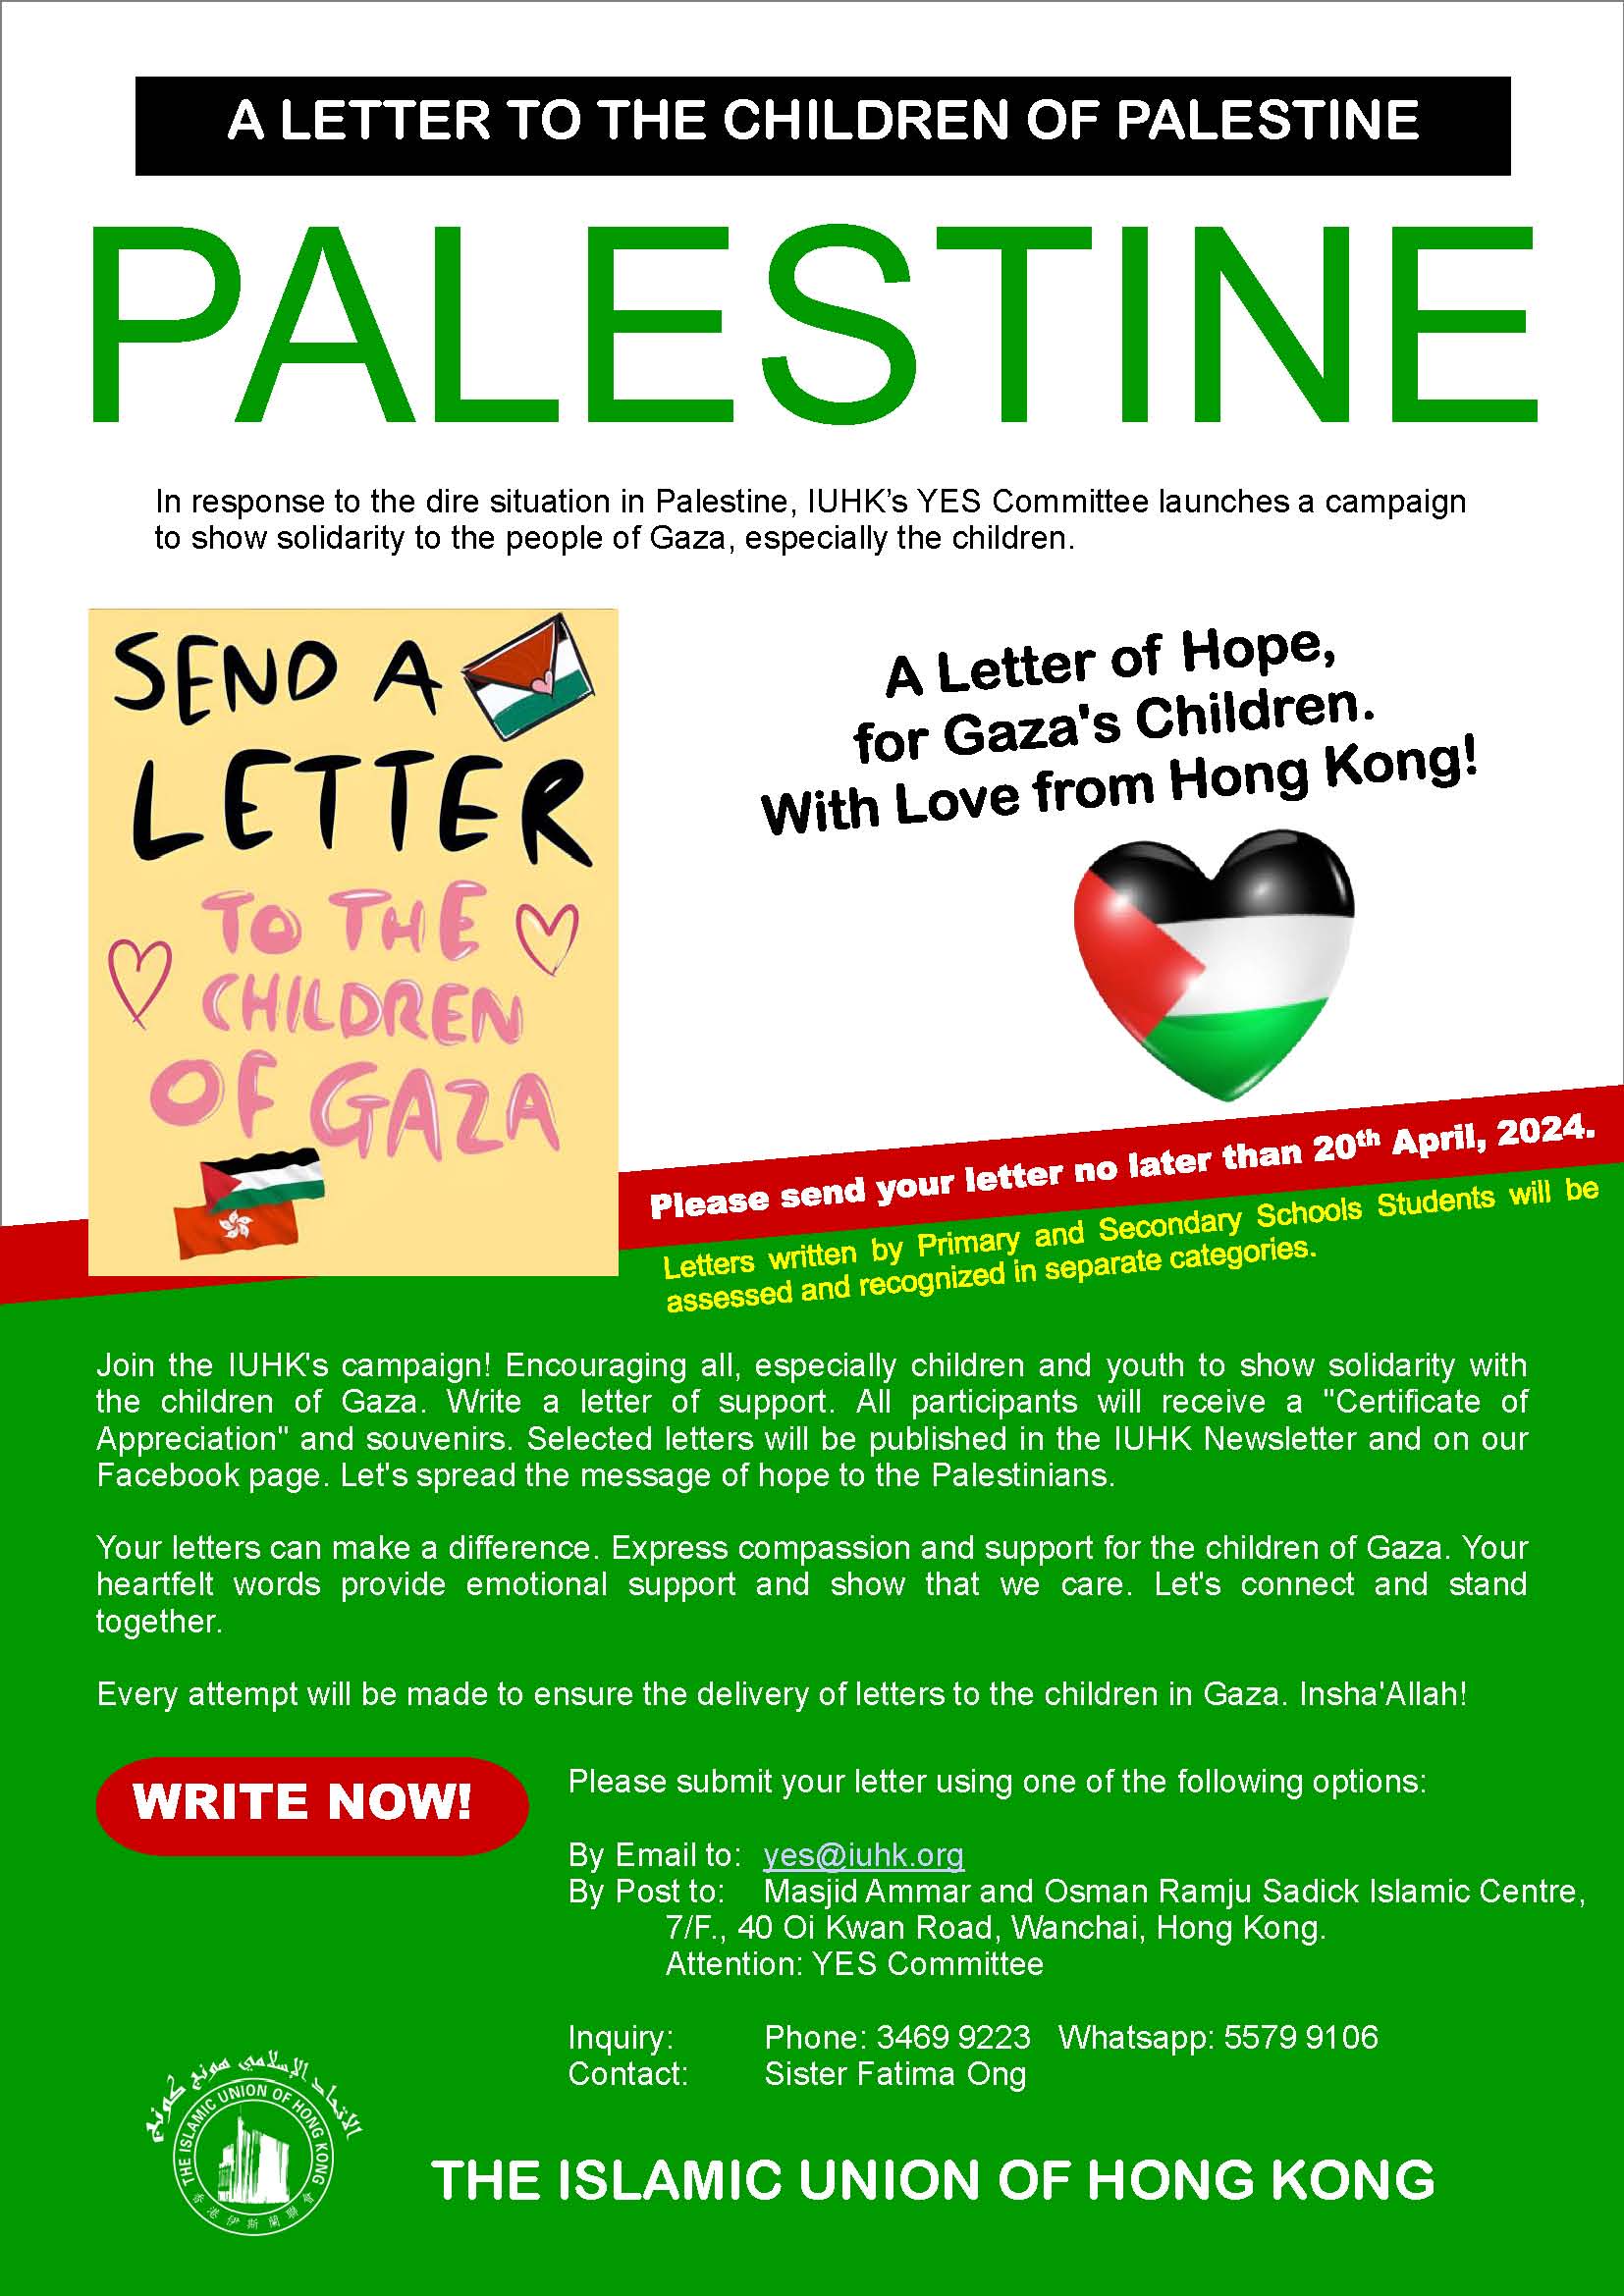 Send a Letter to the Children of Gaza